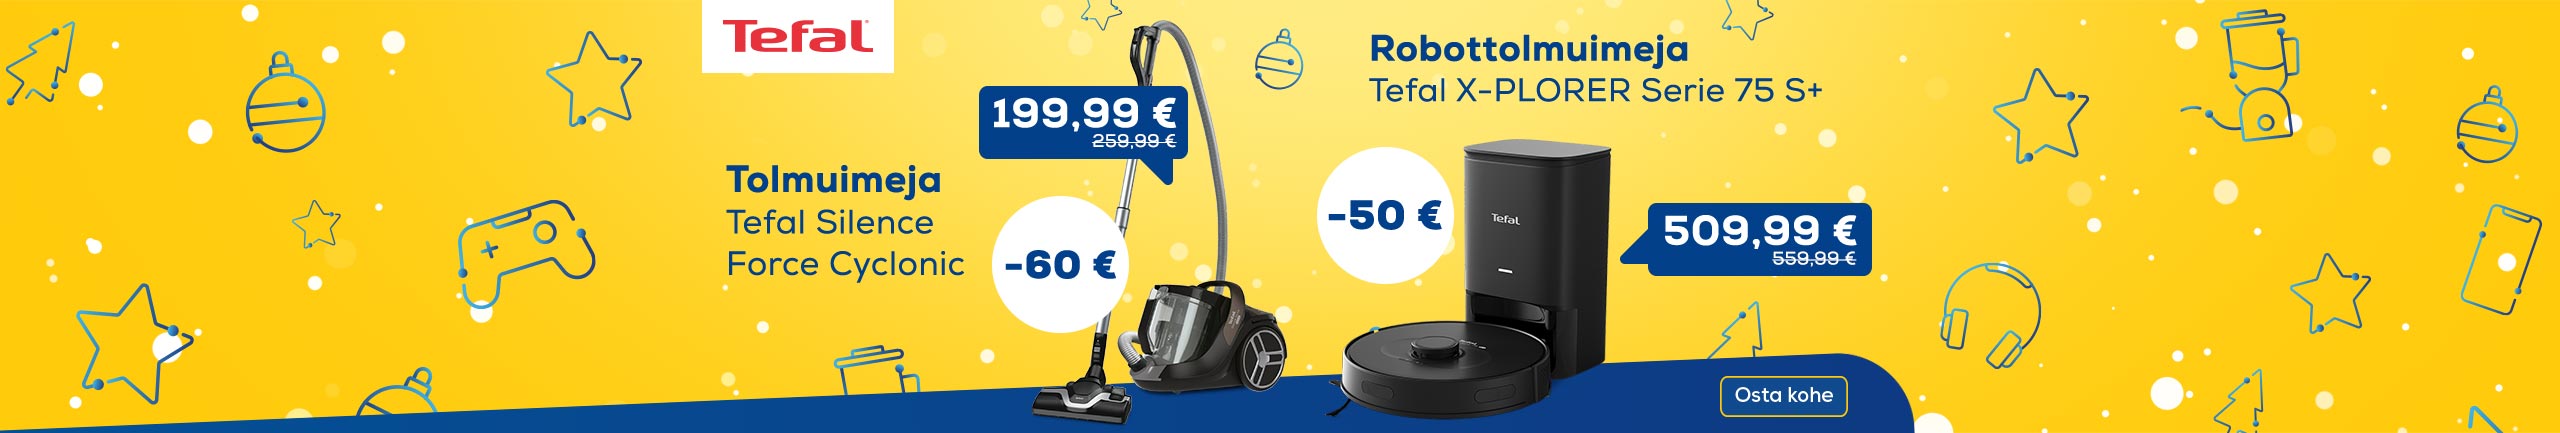 Tefal vacuums now with good prices!